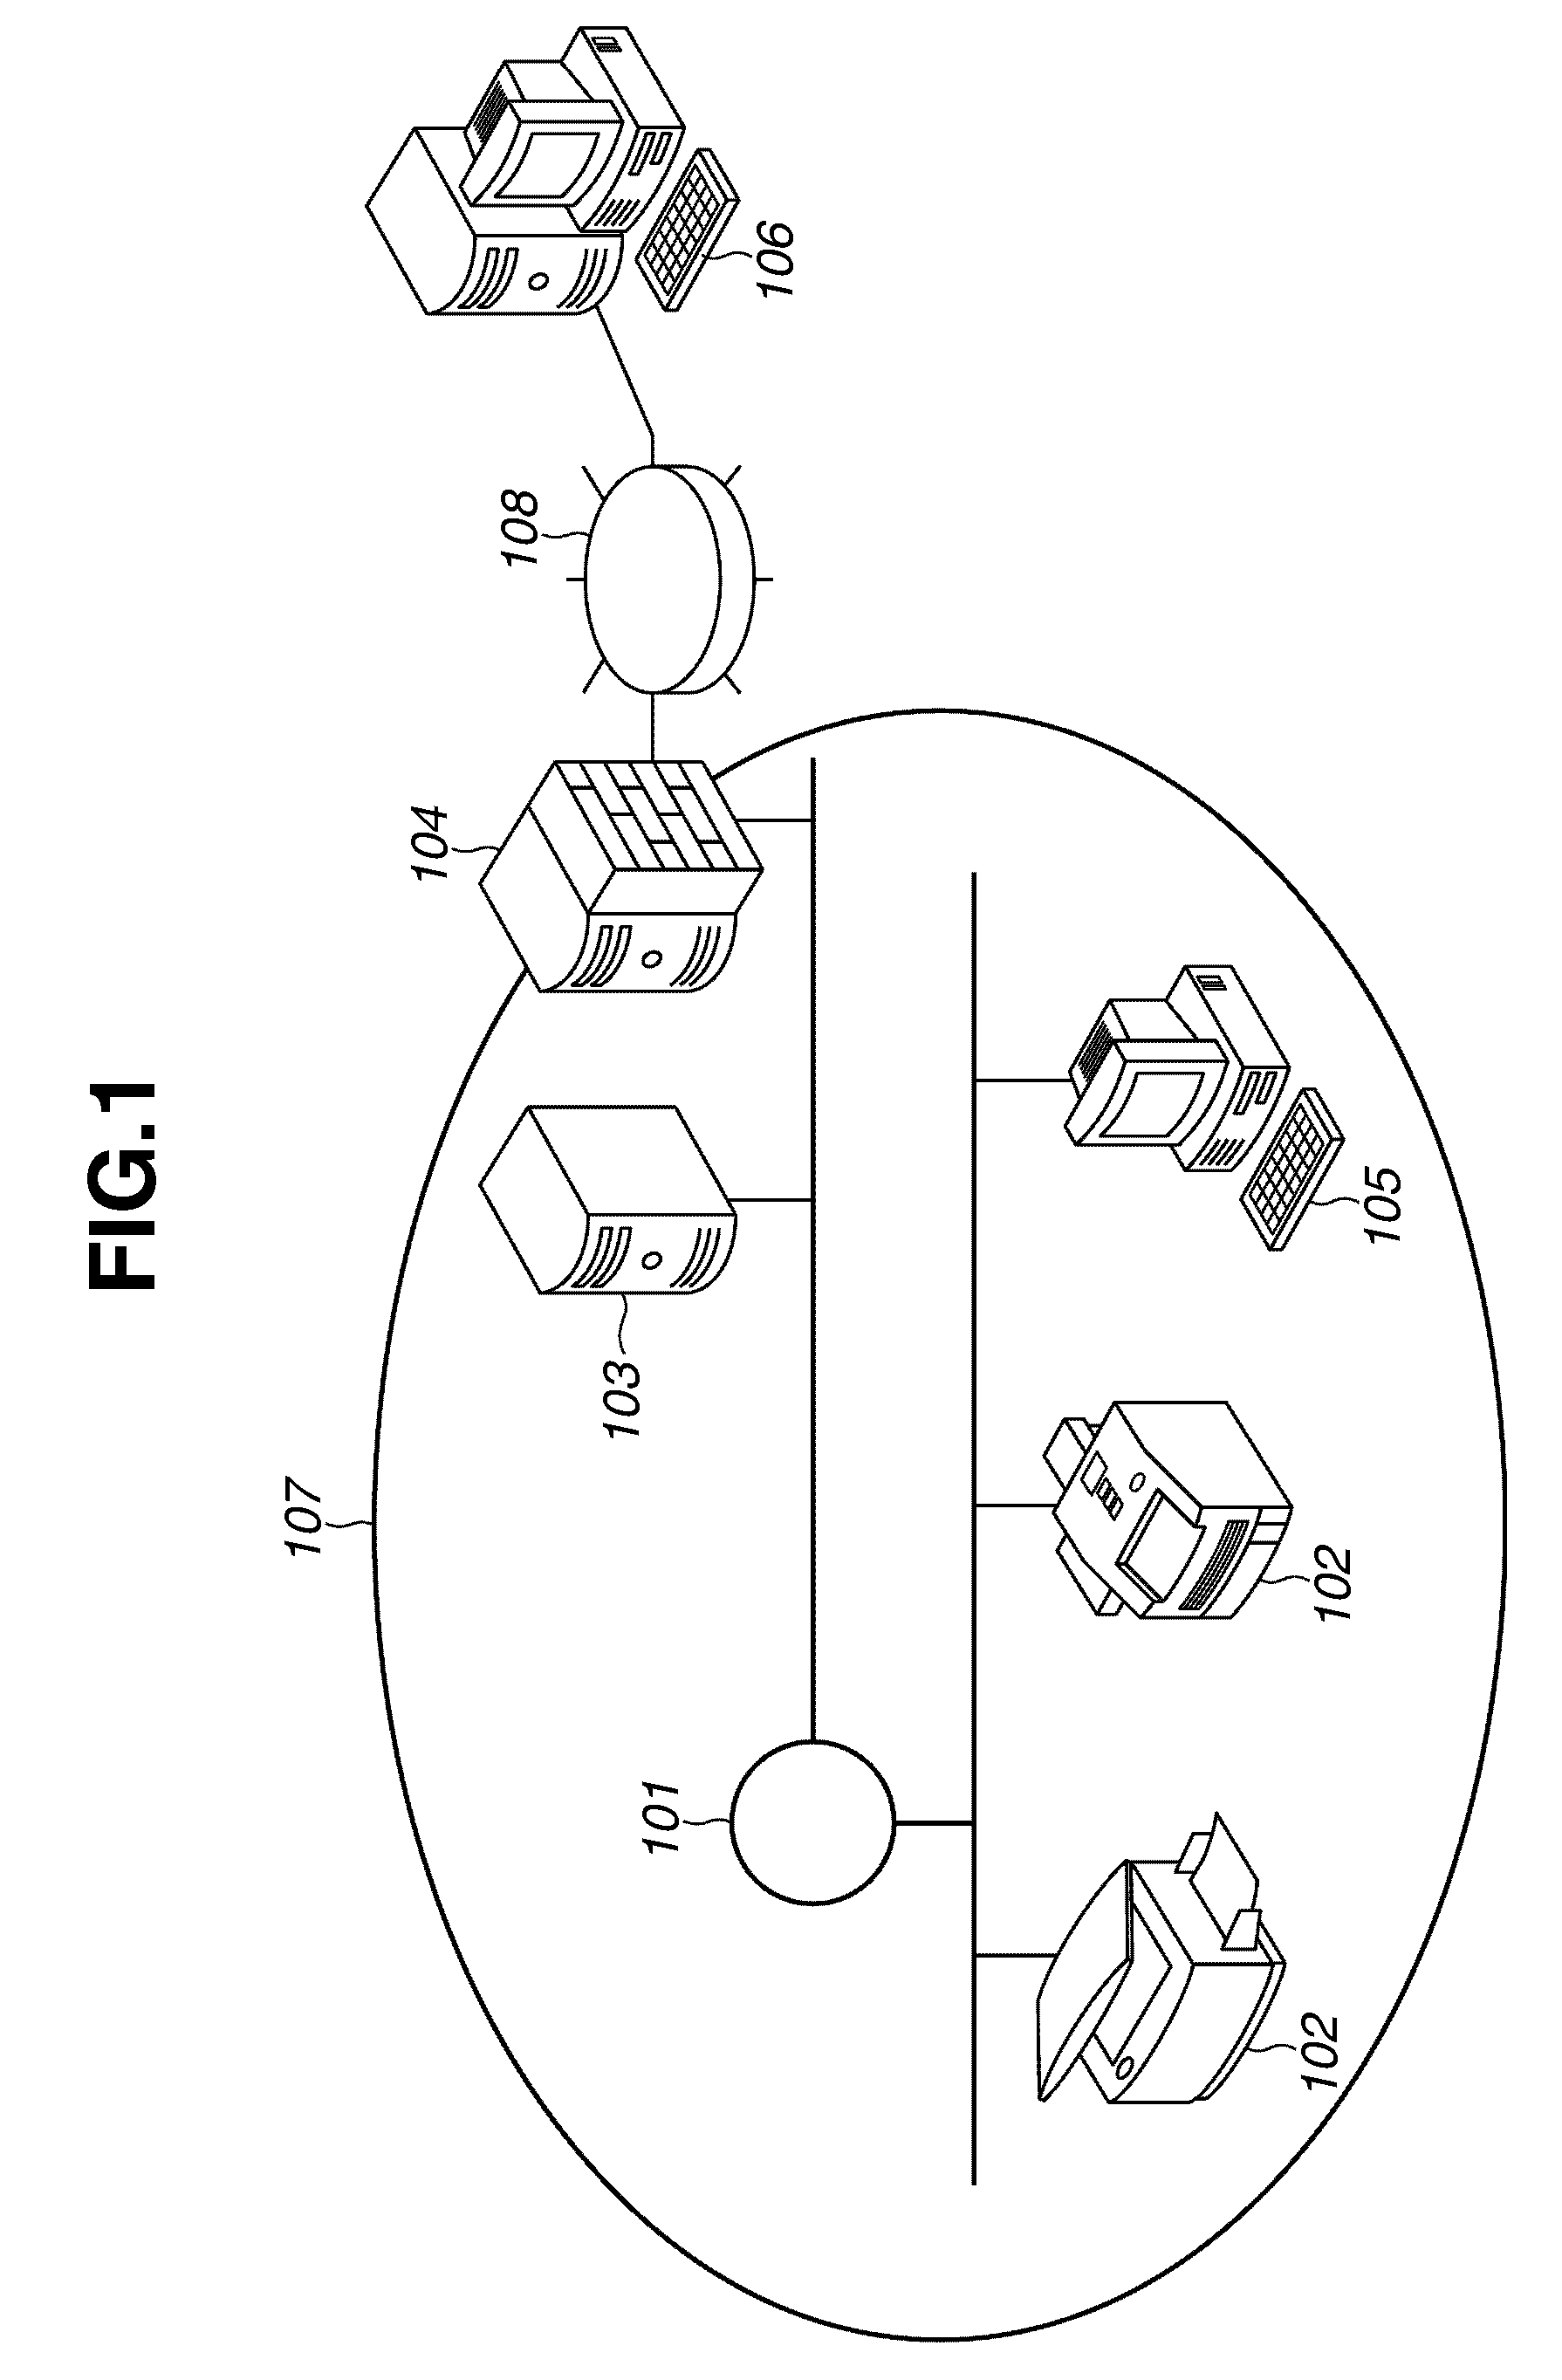 Management server, image forming apparatus, and management method therefor